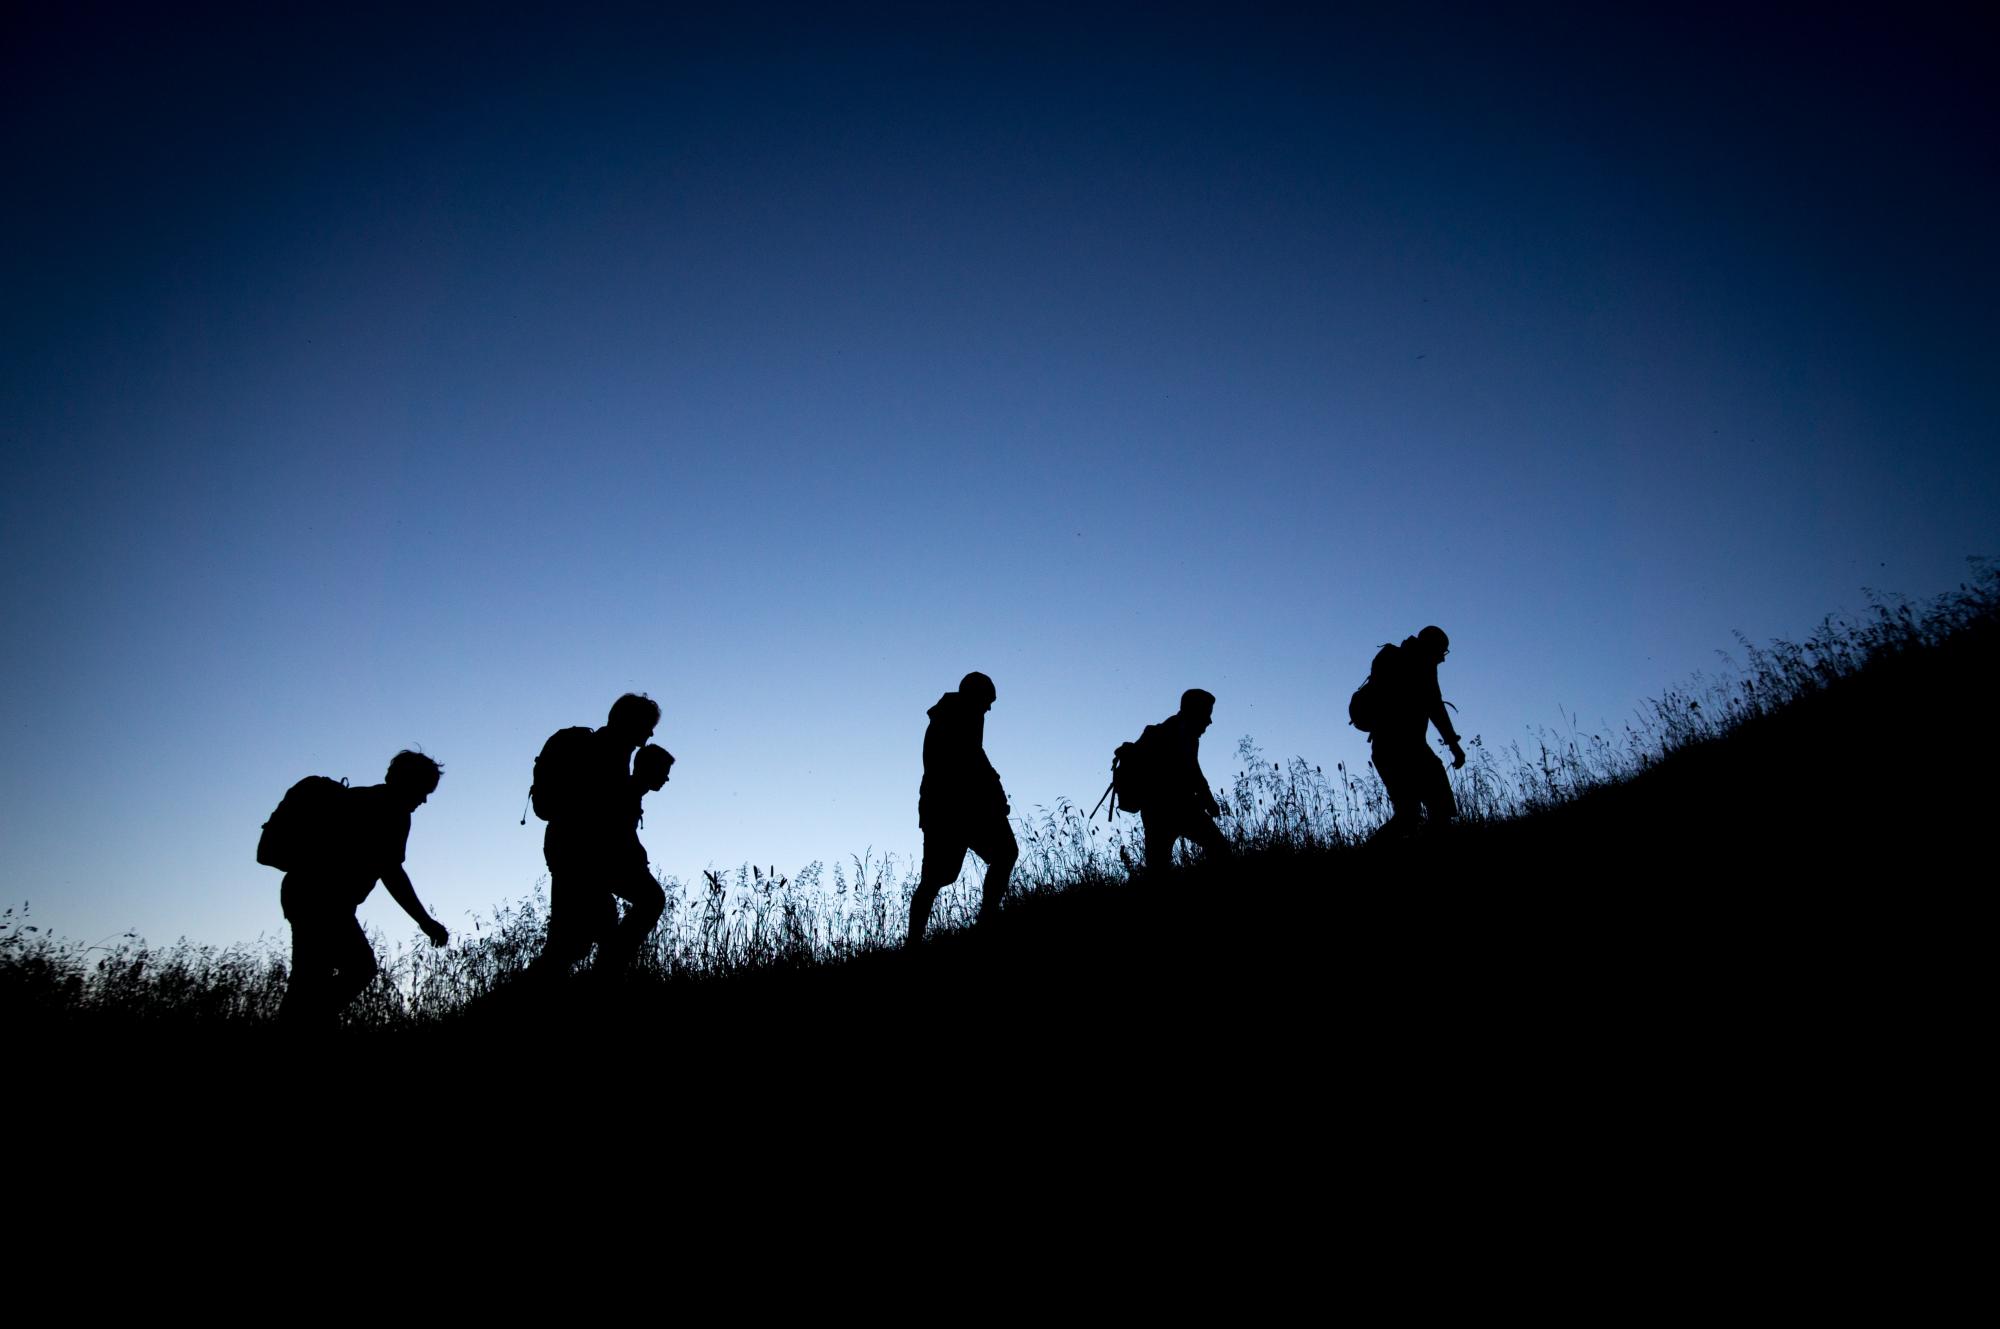 Silhouette of people climbing up a hill